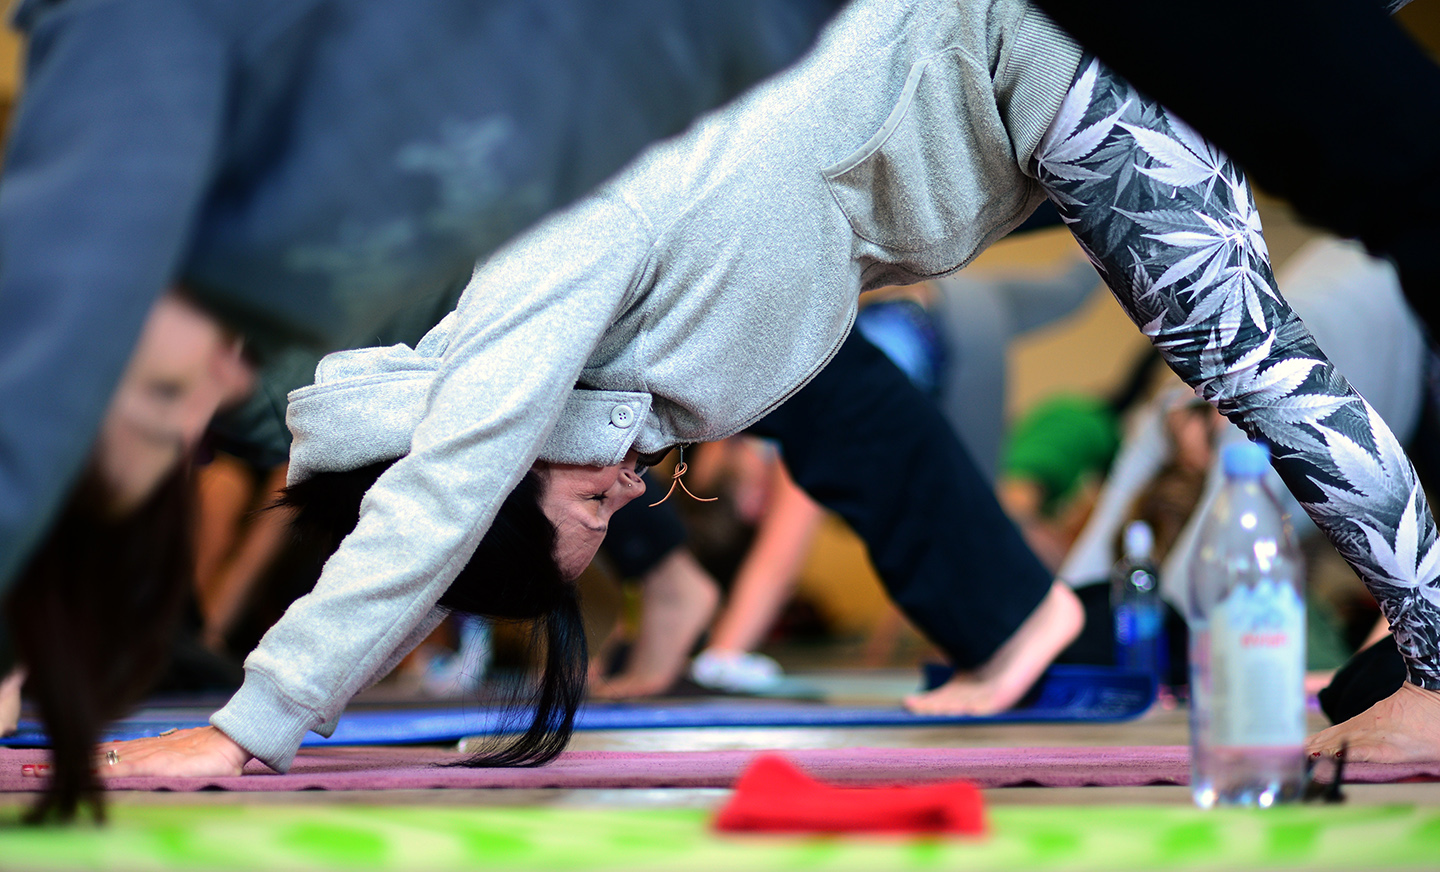 Mason Jar Event Group founder Kendal Norris practices yoga at Yoga With A View on May 15 2016. The event paired carefully selected marijuana strains with yoga and a multiple course brunch. (Vince Chandler, The Denver Post)